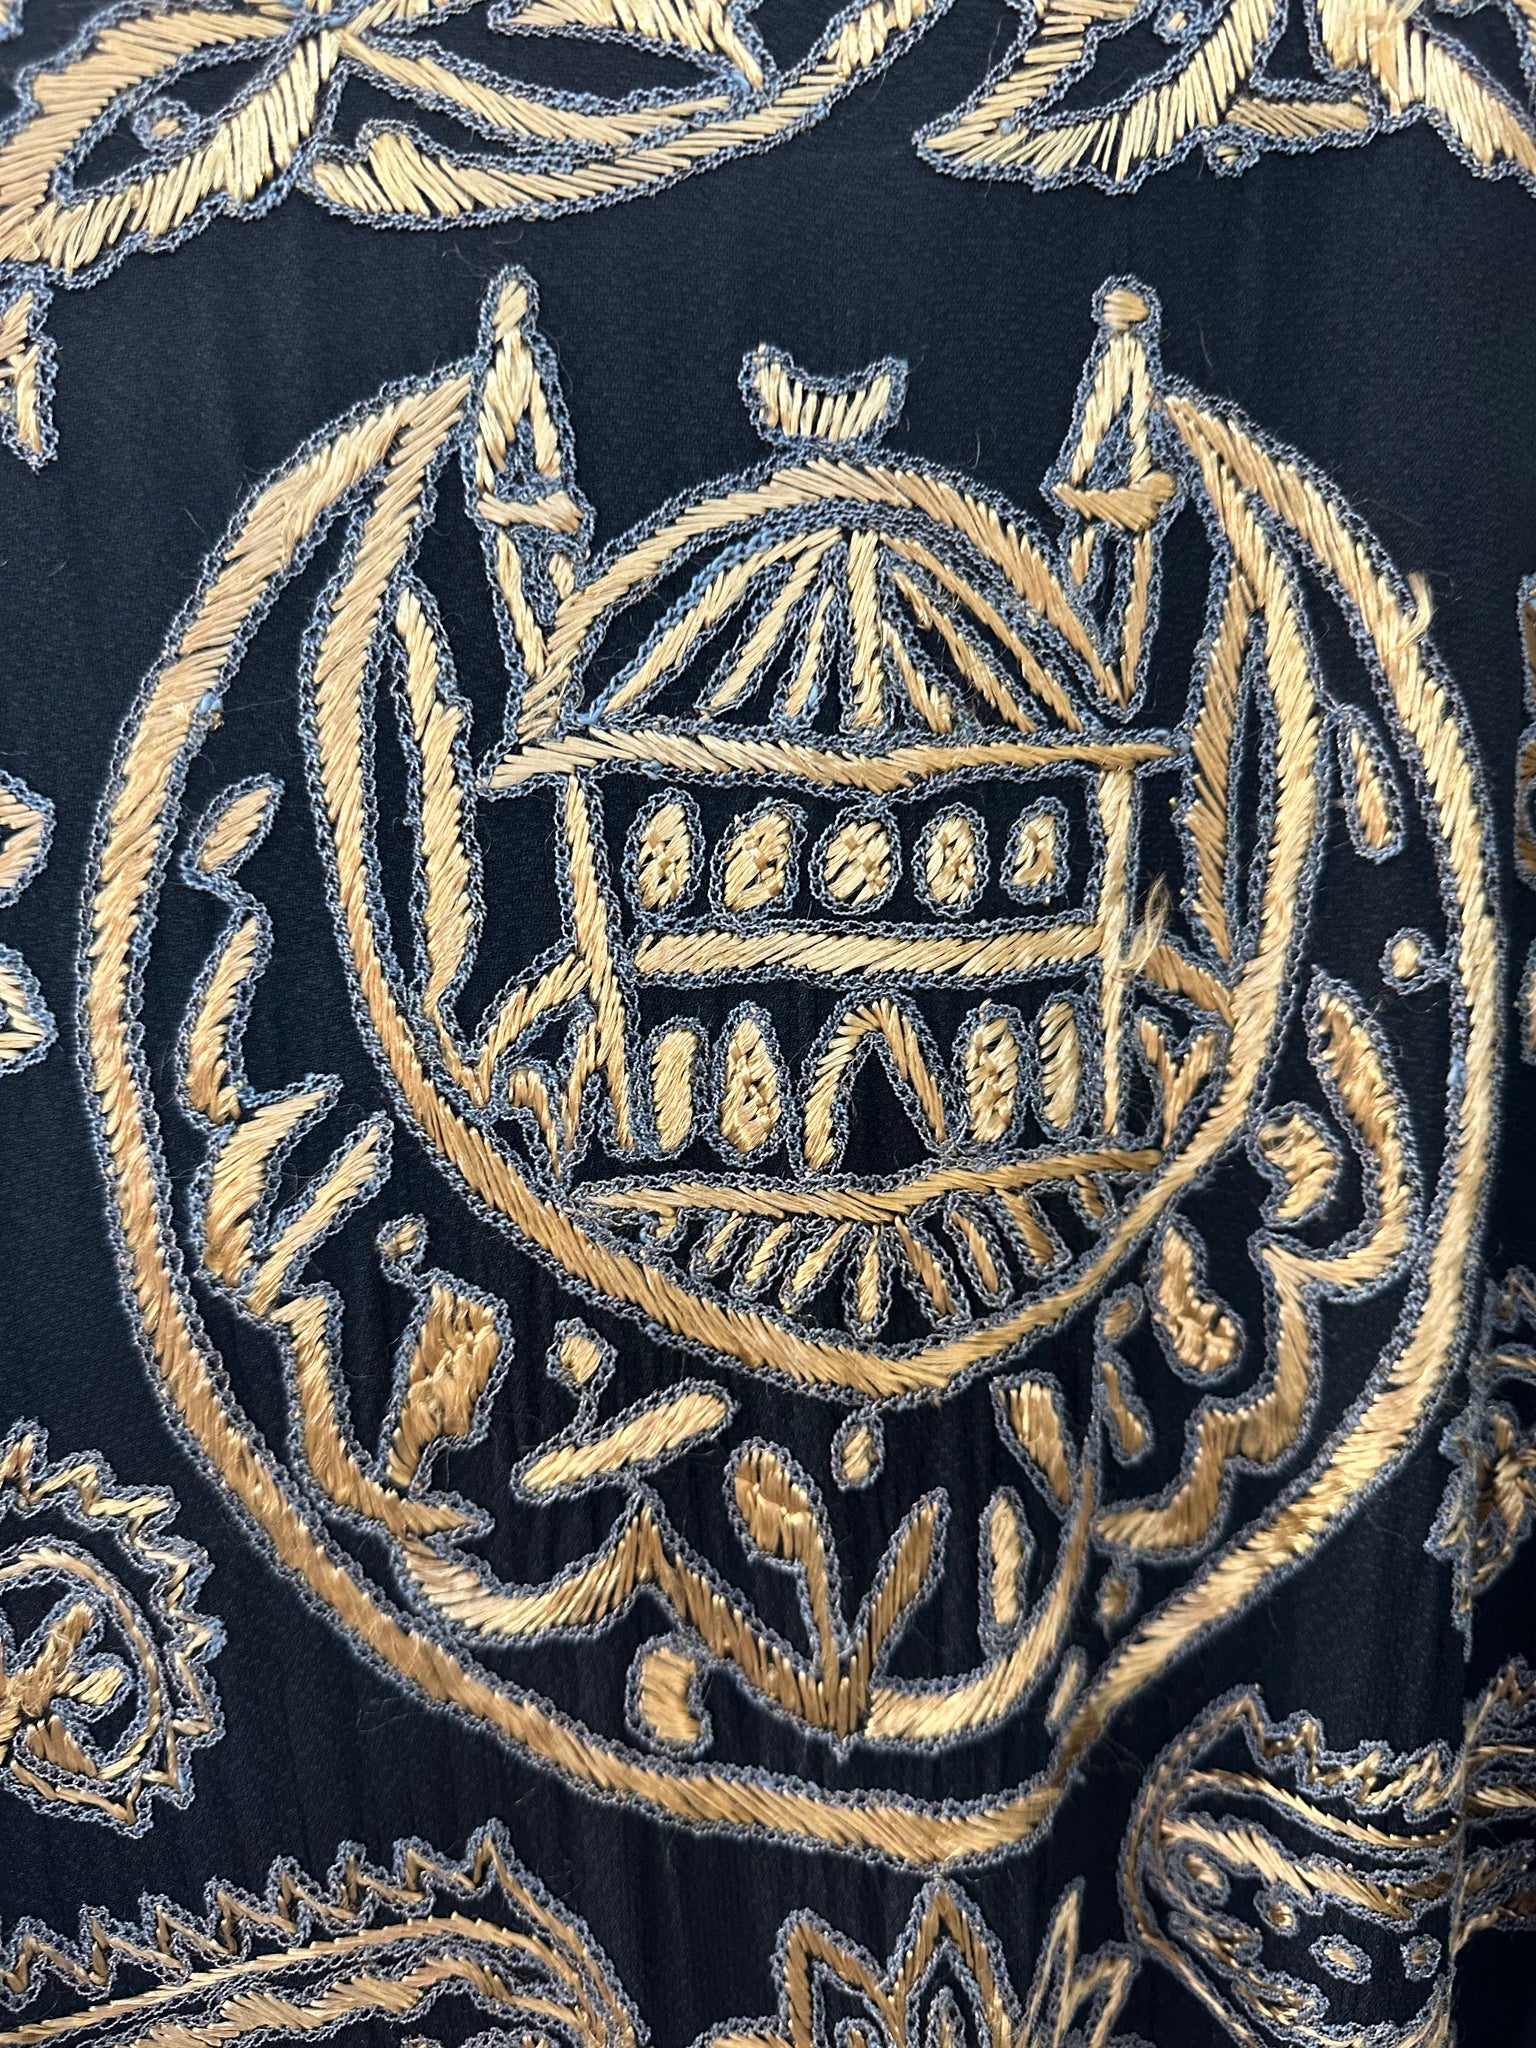 Turkish Mid 20th Century Black Hand Embroidered  Caftan DETAIL4 of 4